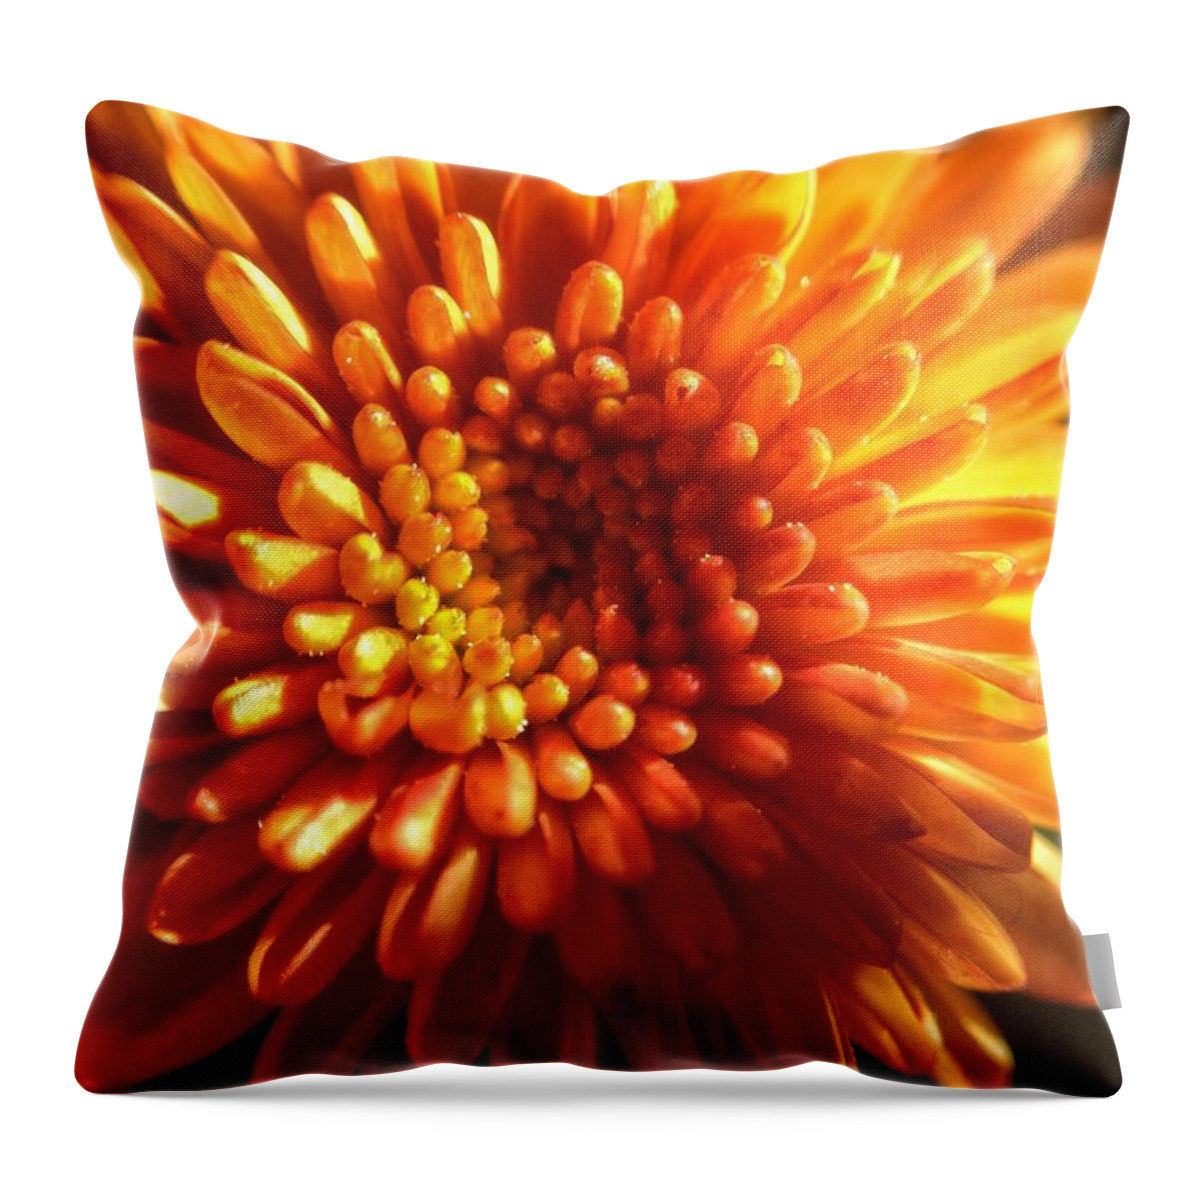 Macro Flower Bloom Flowers Blooms Andrew Rhine Scoobydrew81 Petals Marigold Nature Close-up Closeup Detail Sunny Bright Color Botanical Botanic Botanica Flora Floral Spiral Round Focus Park Spring  Throw Pillow featuring the photograph Sunshine Marigold by Andrew Rhine